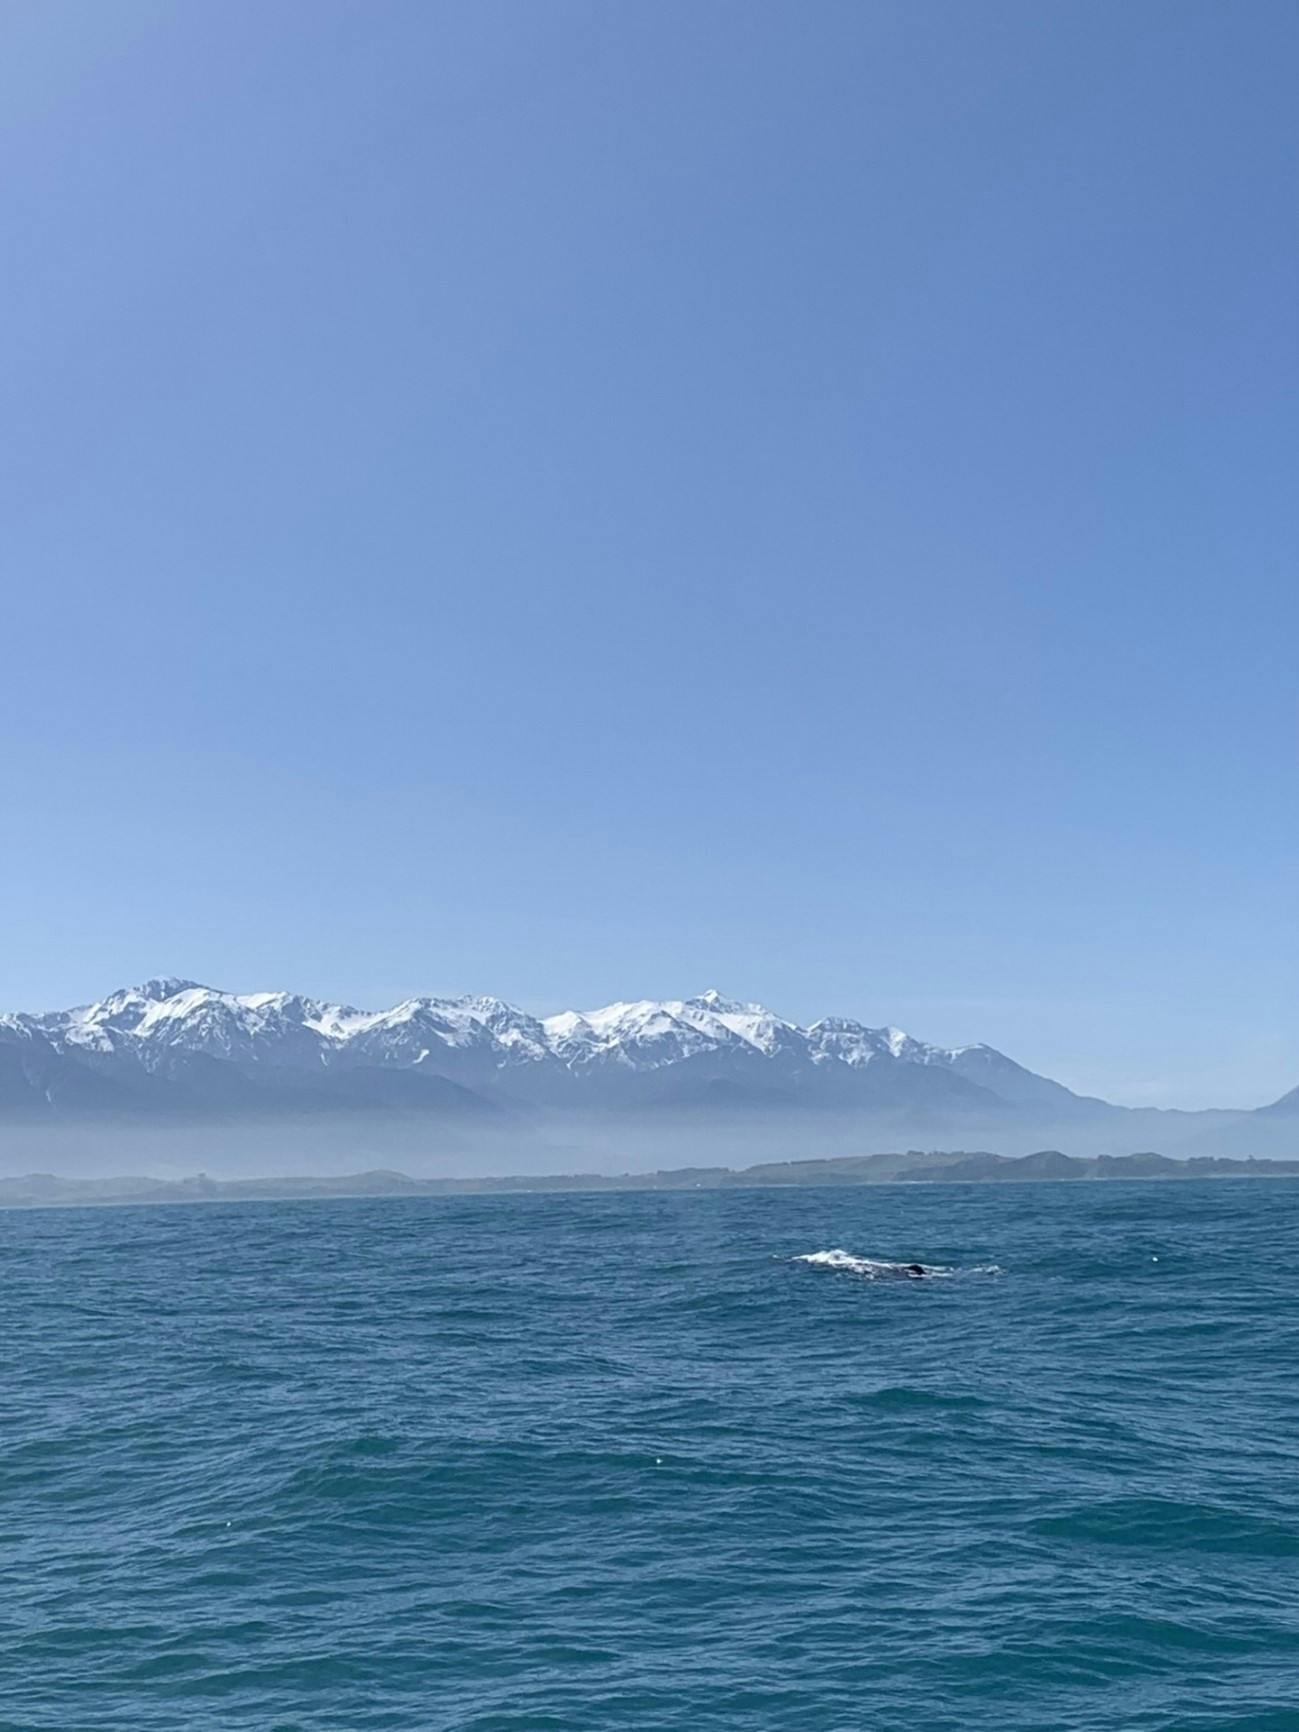 A photo of the ocean under blue skies with snow-topped mountains on the horizon, taken from the perspective of someone in a boat.  A glimpse of a sperm whale is visible as a dark patch amidst splashing water.